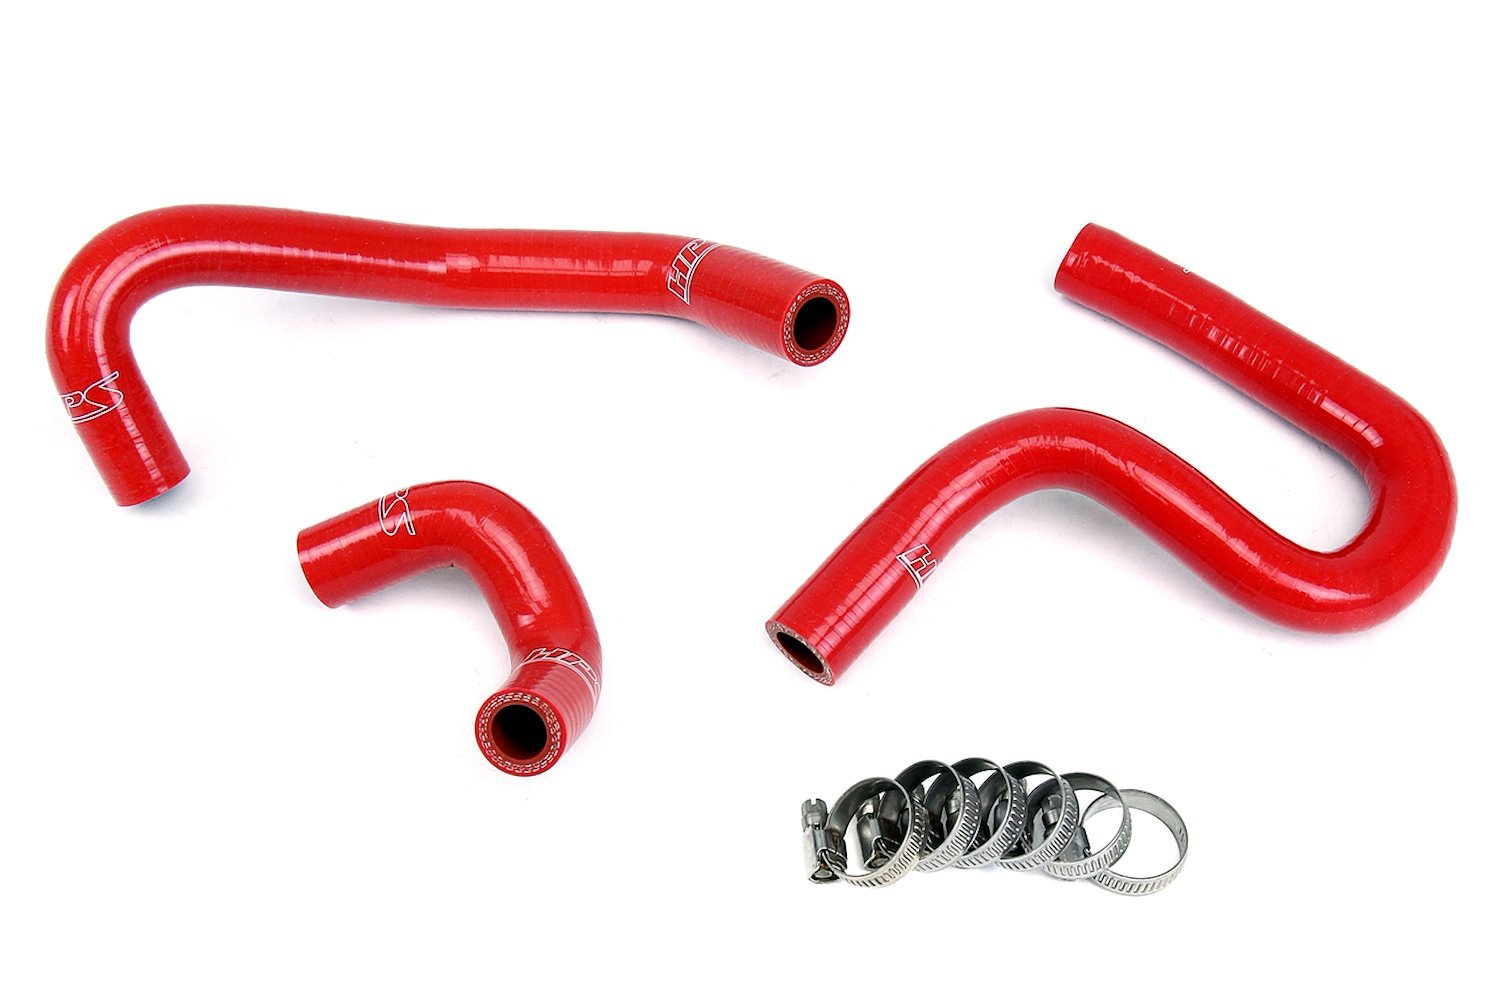 57-1797-RED Heater Hose Kit, High-Temp 3-Ply Reinforced Silicone, Replace OEM Rubber Heater Coolant Hoses